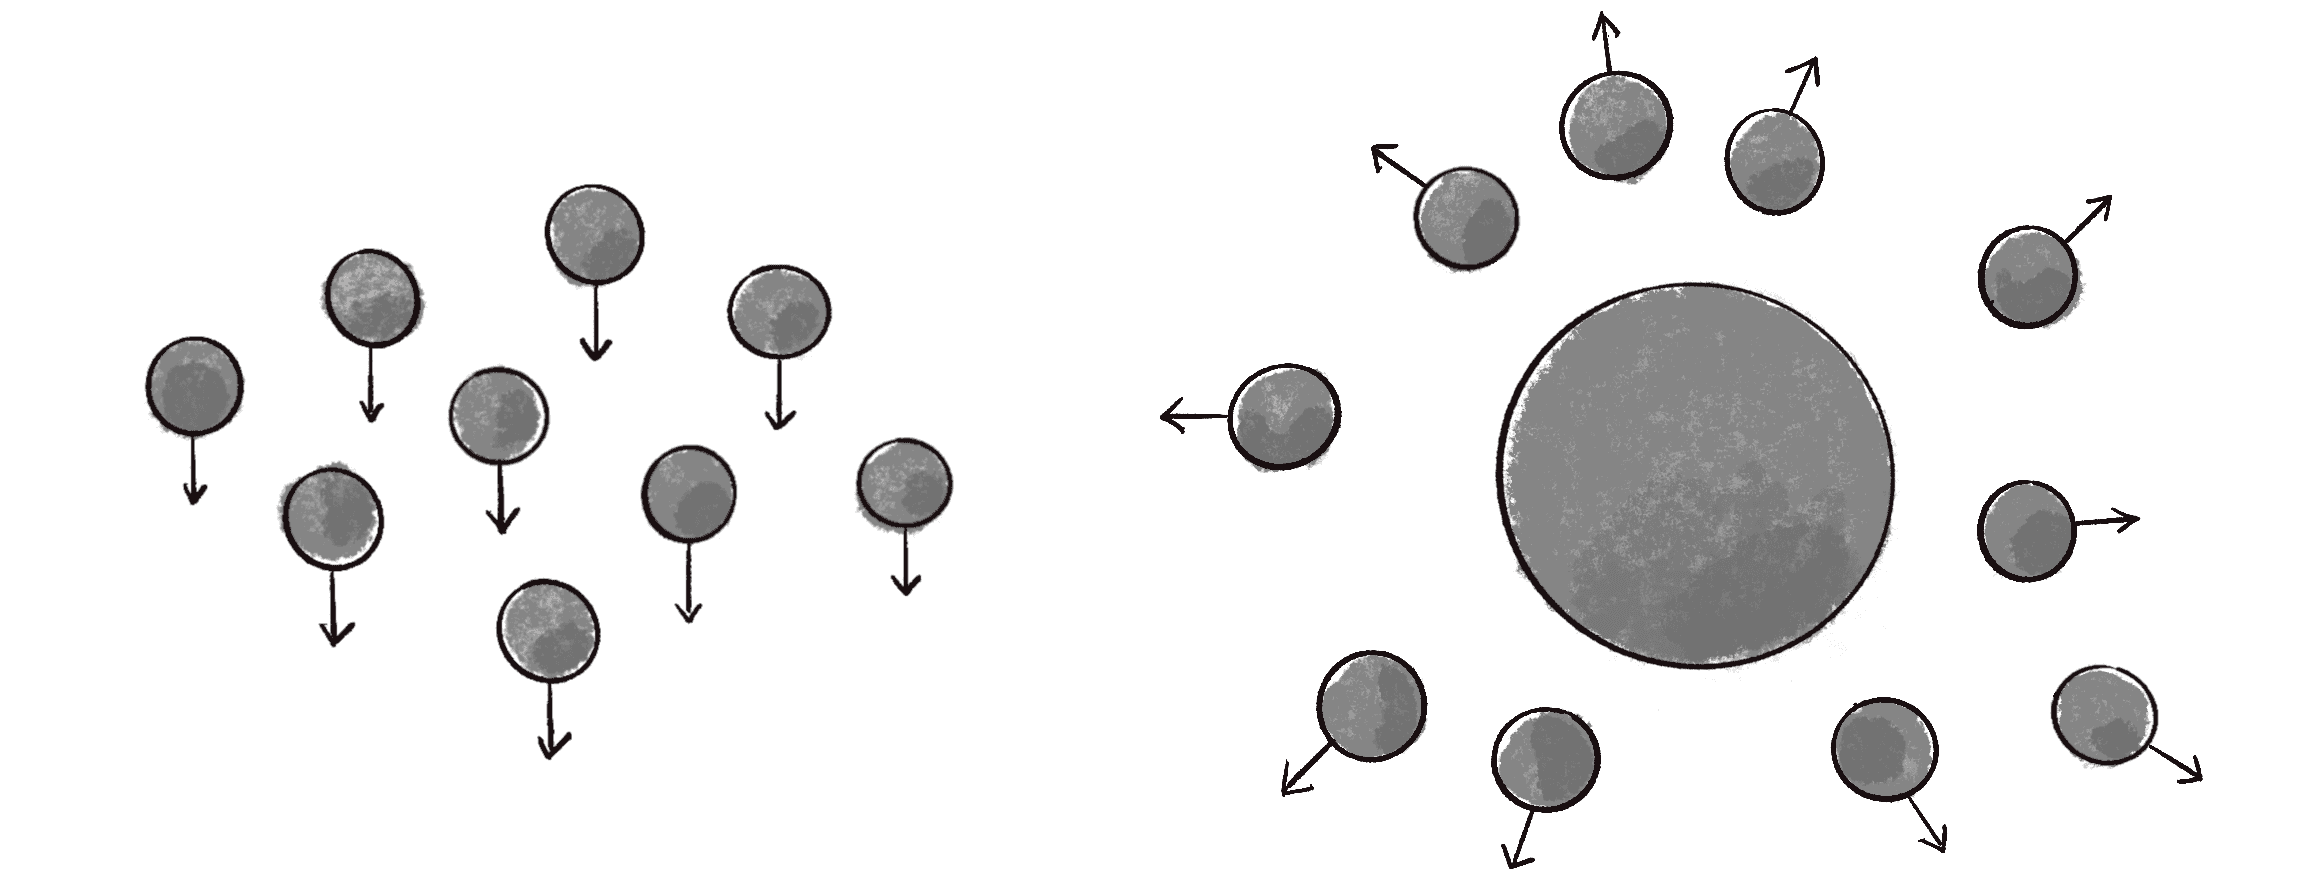 Figure 4.6: A gravity force where vectors are all identical (left) and a repeller force where all vectors point in different directions (right)